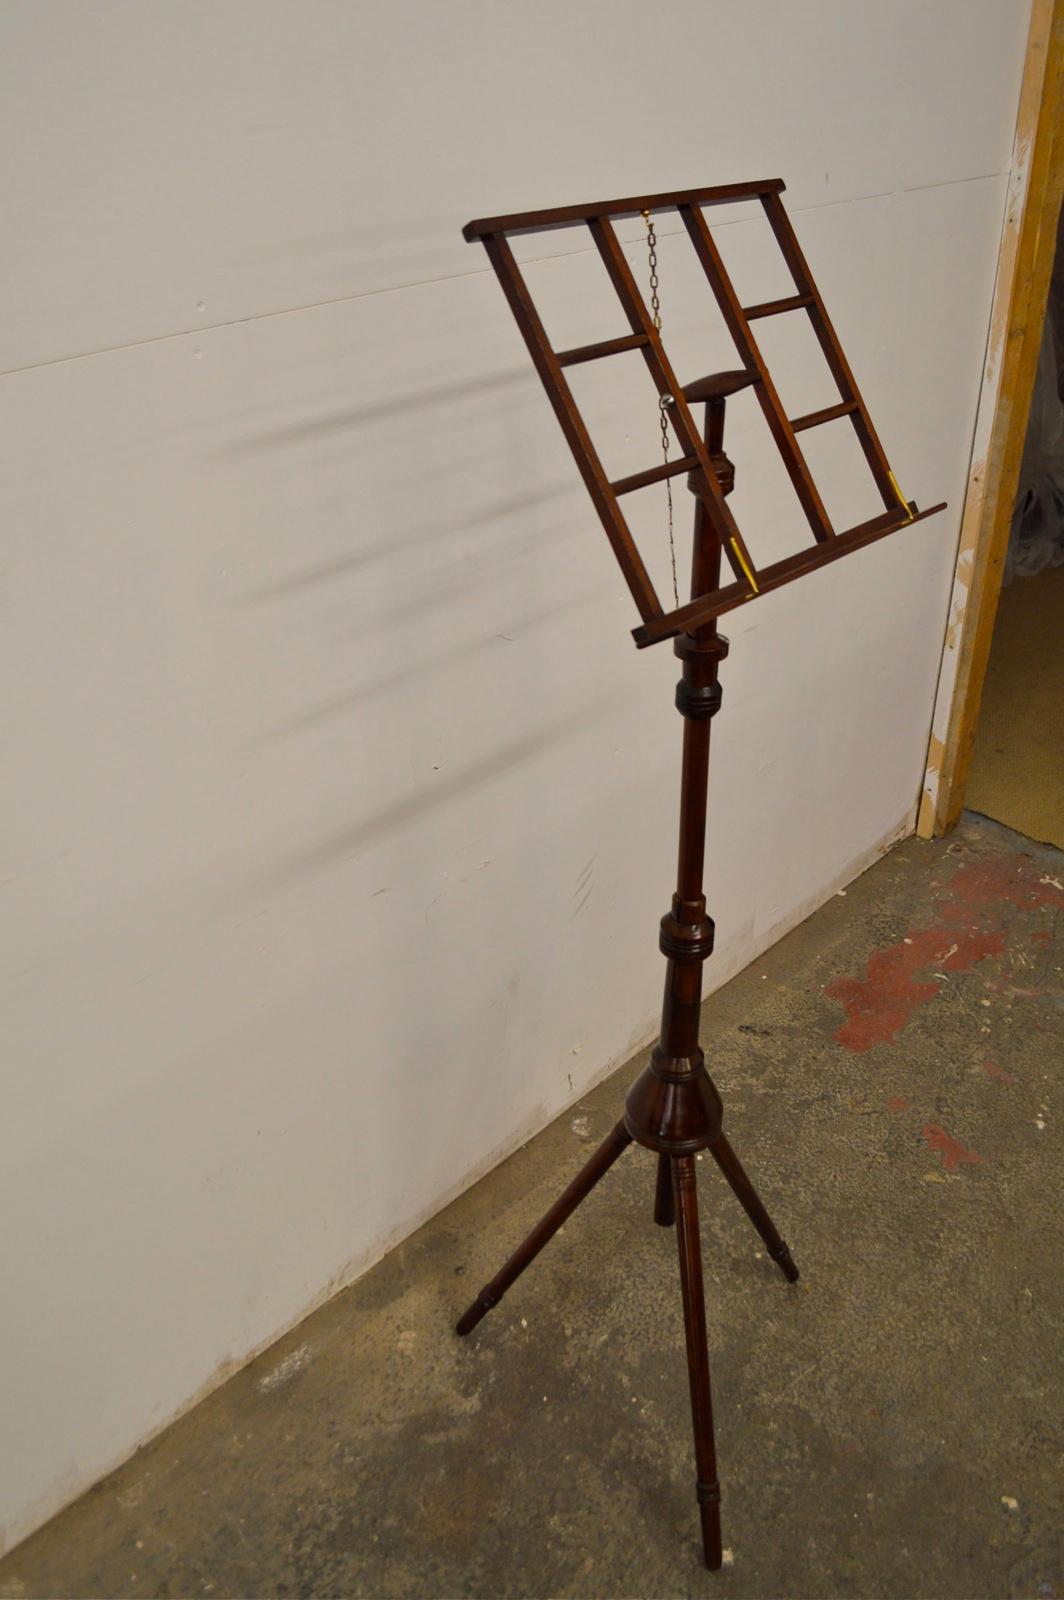 Fully Adjustable Mahogany Music Stand In Excellent Condition For Sale In Macclesfield, Cheshire